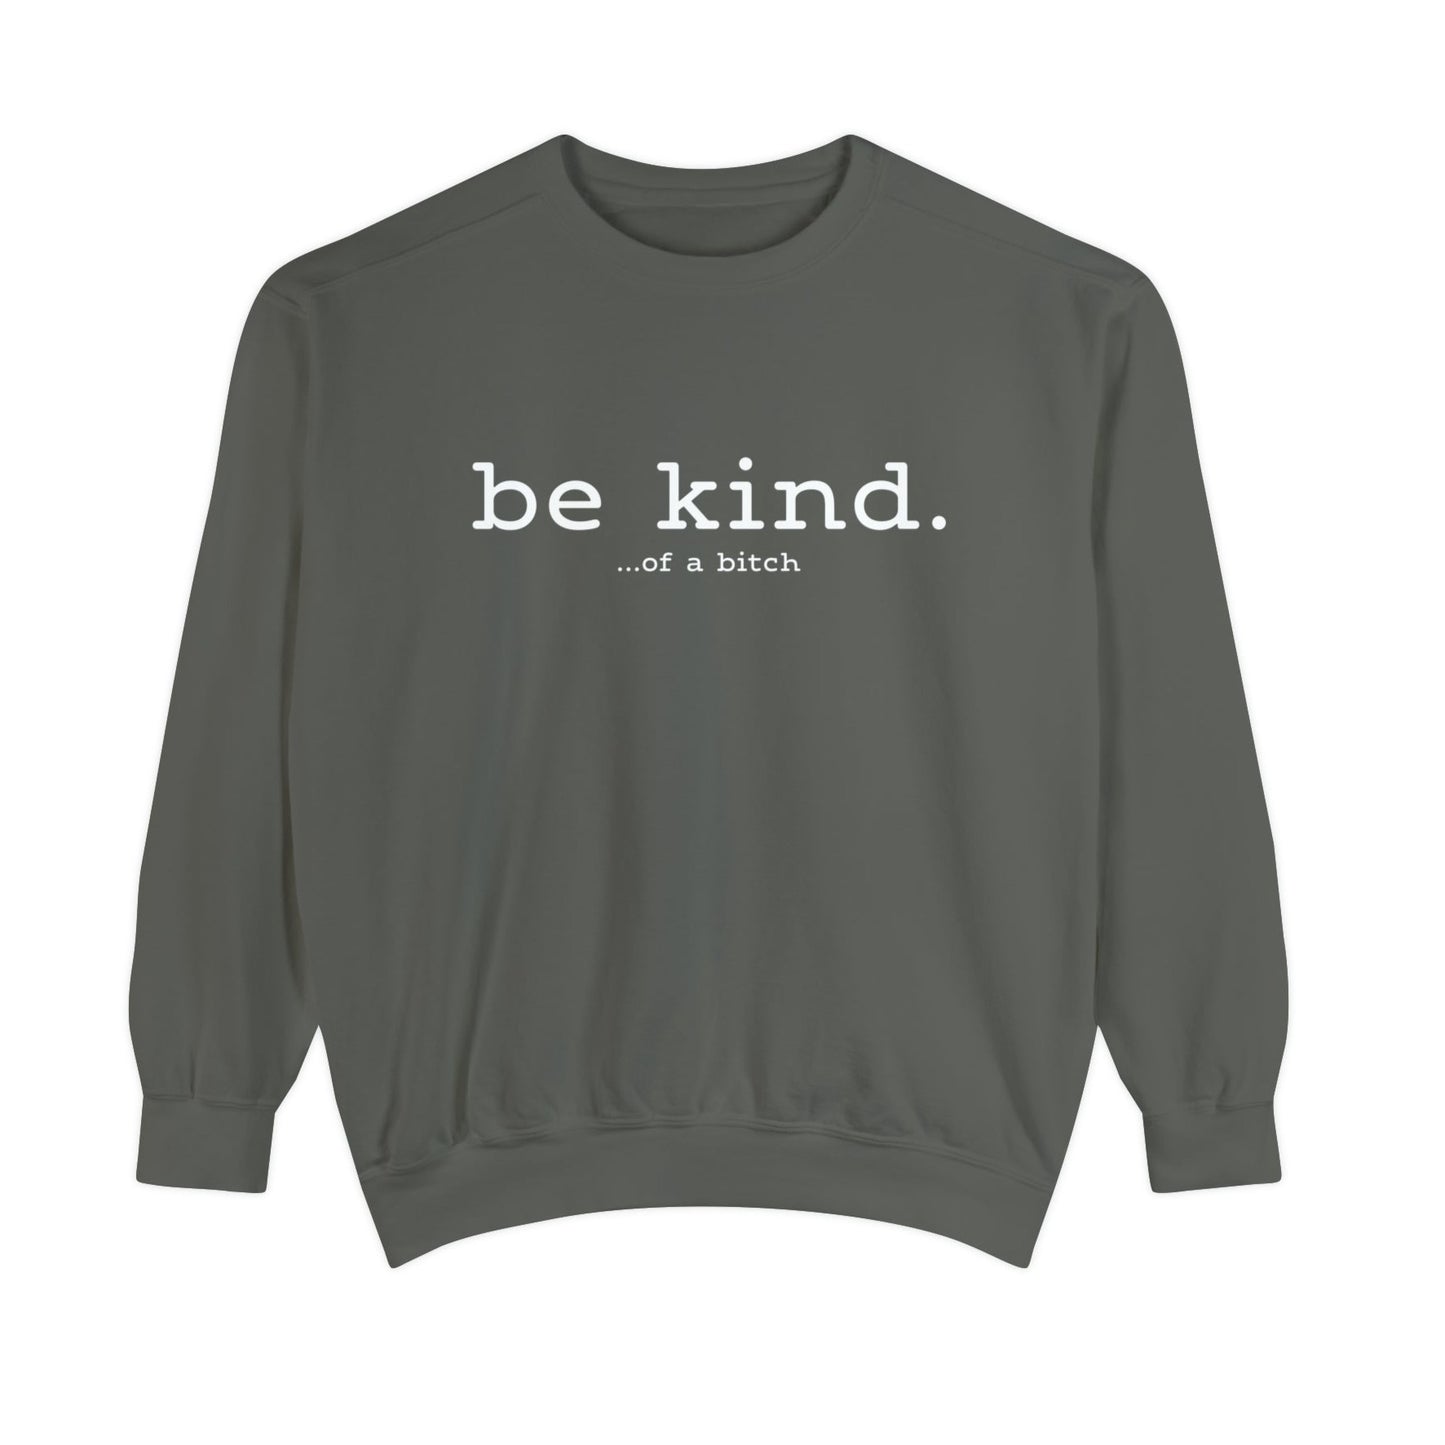 be kind. ...of a bitch